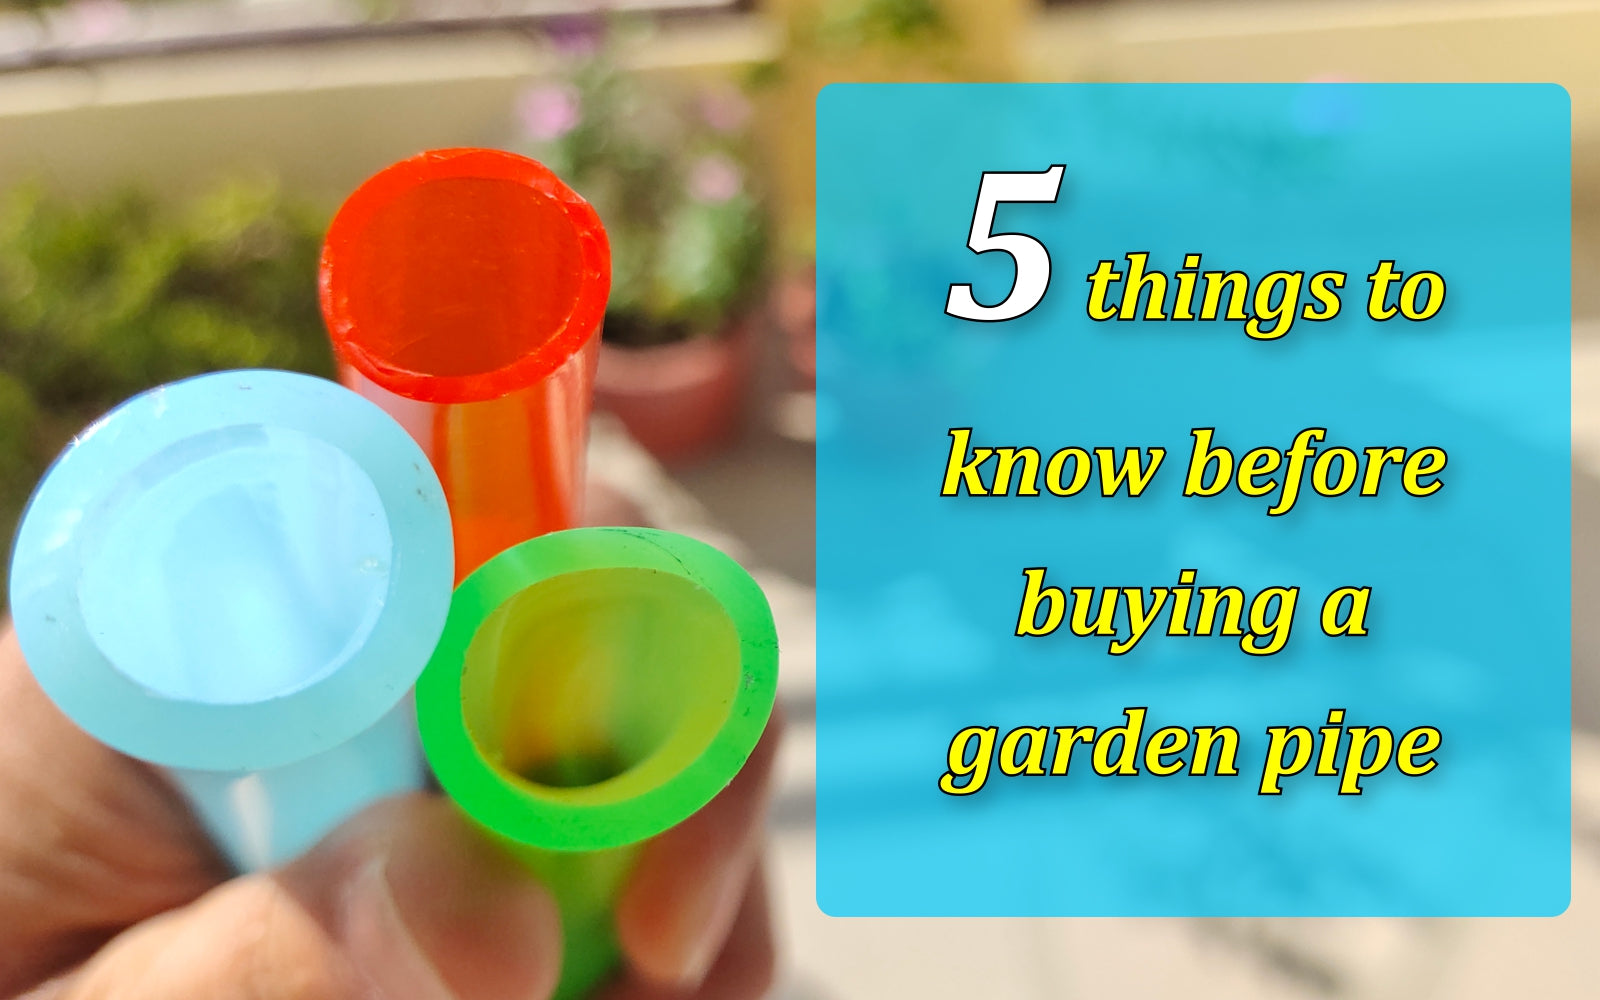 5 Things to Know Before Buying a Garden Pipe - Garud Pipes